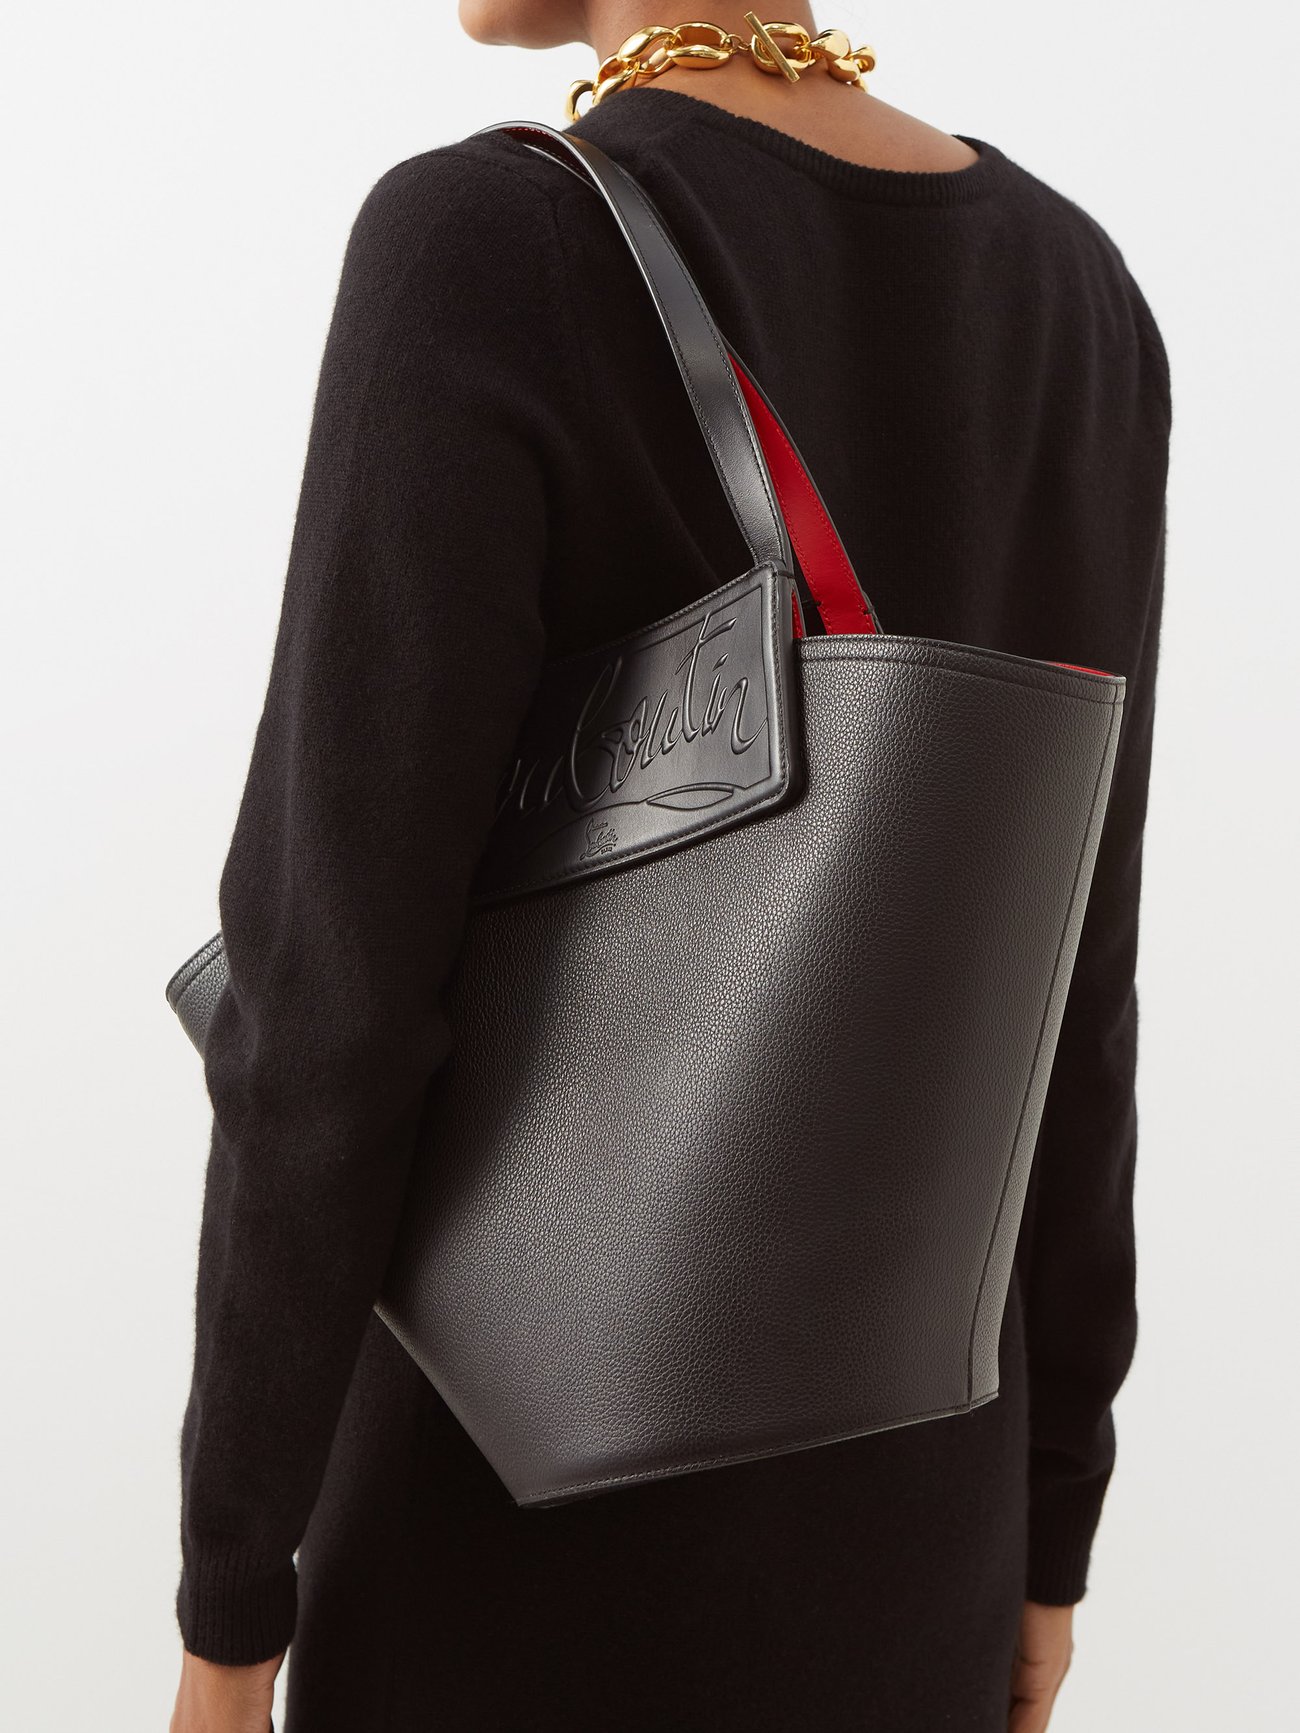 Black Loubishore grained-leather tote bag, Christian Louboutin